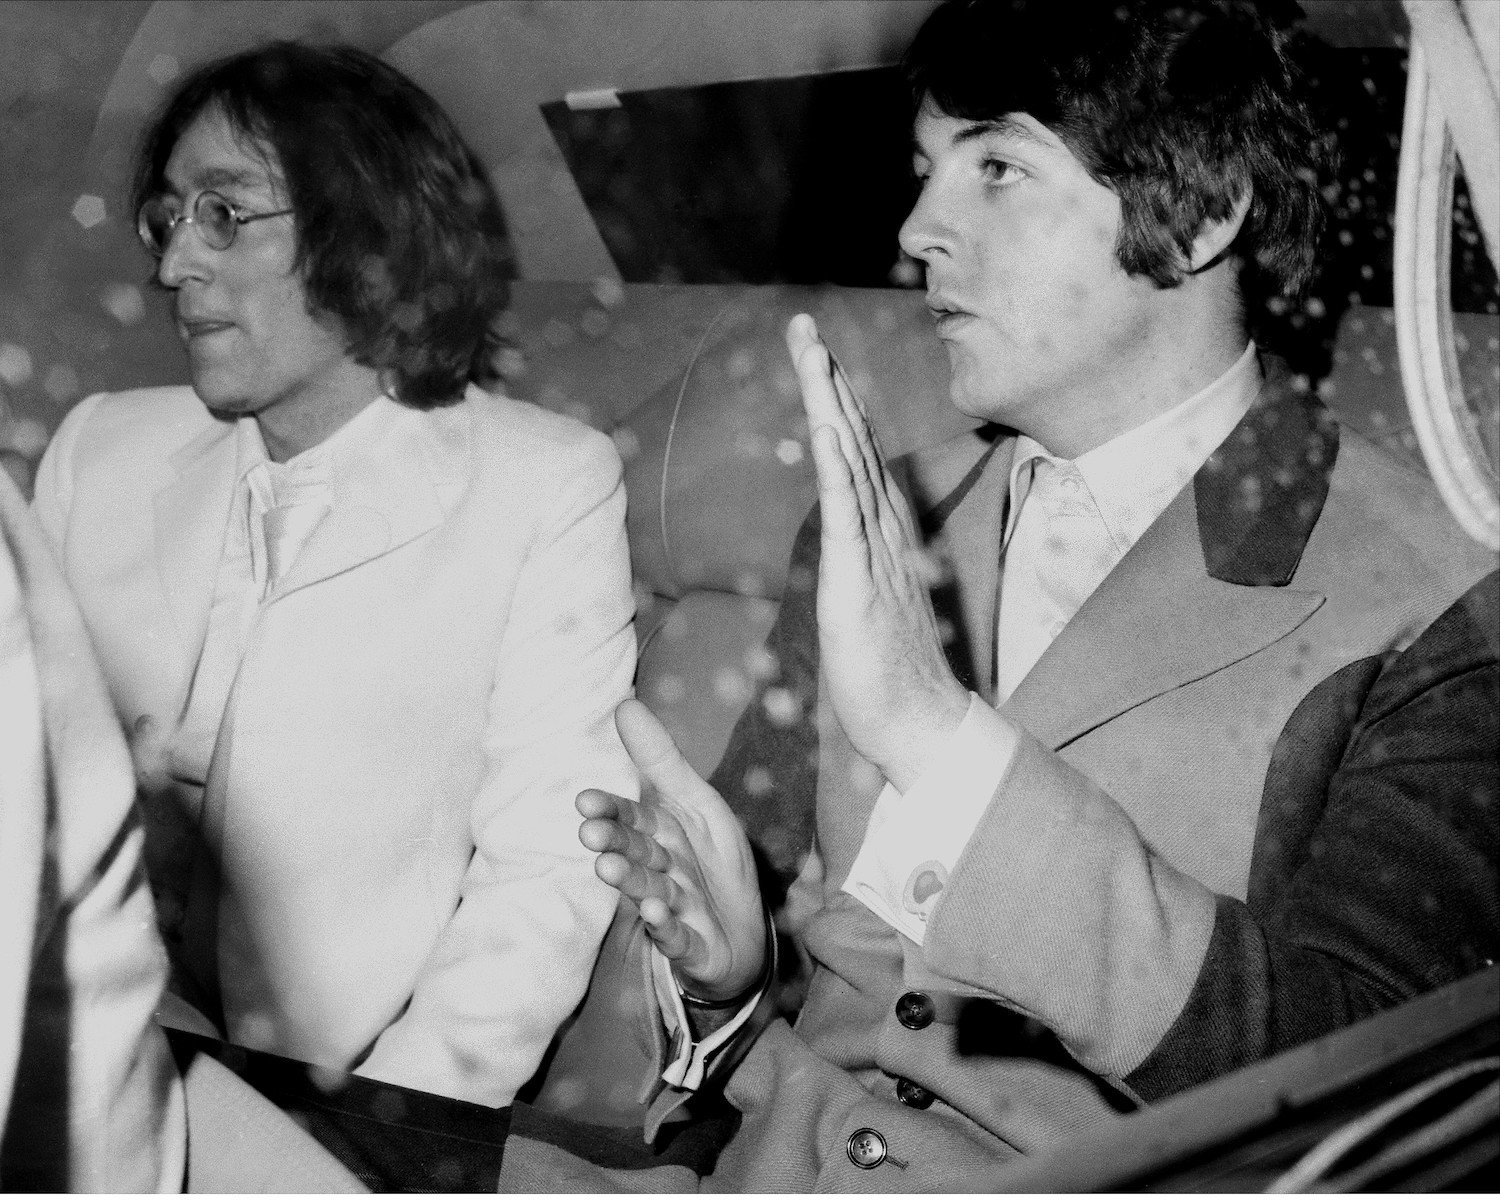 John Lennon and Paul McCartney in the back of a limousine in New York City